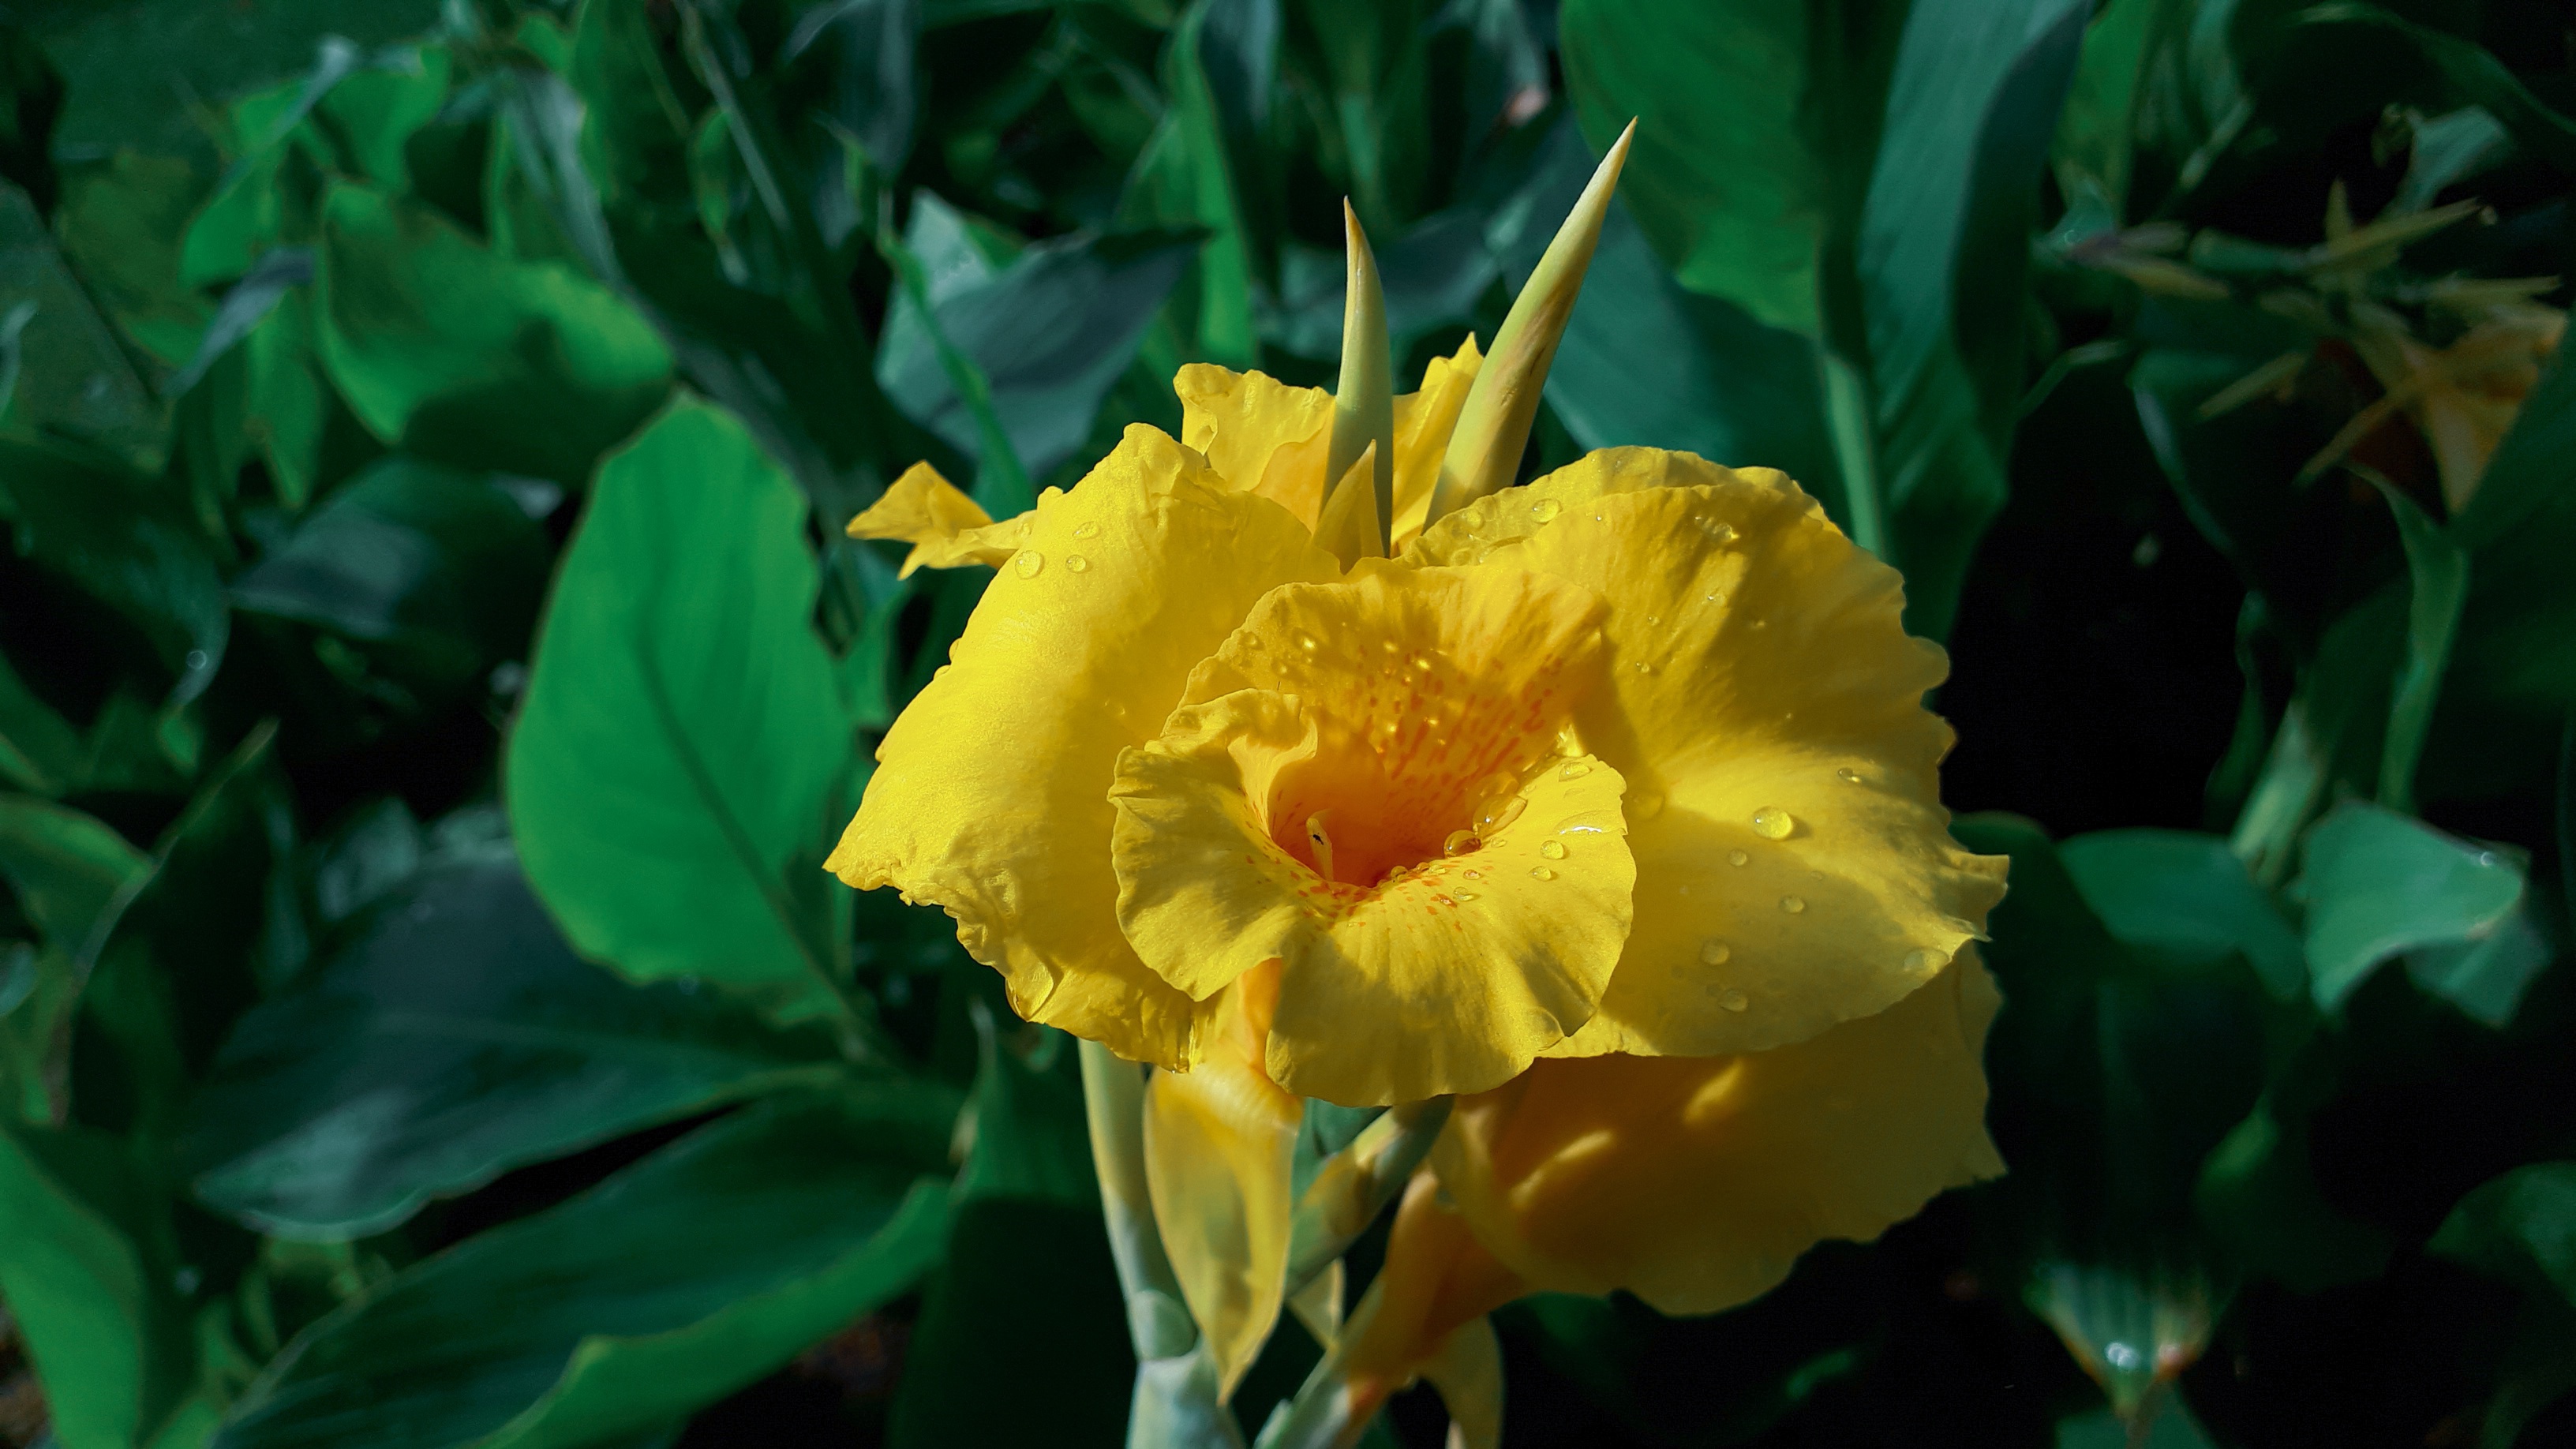 wallpapers earth, gladiolus, gladiolius, yellow flower, flowers